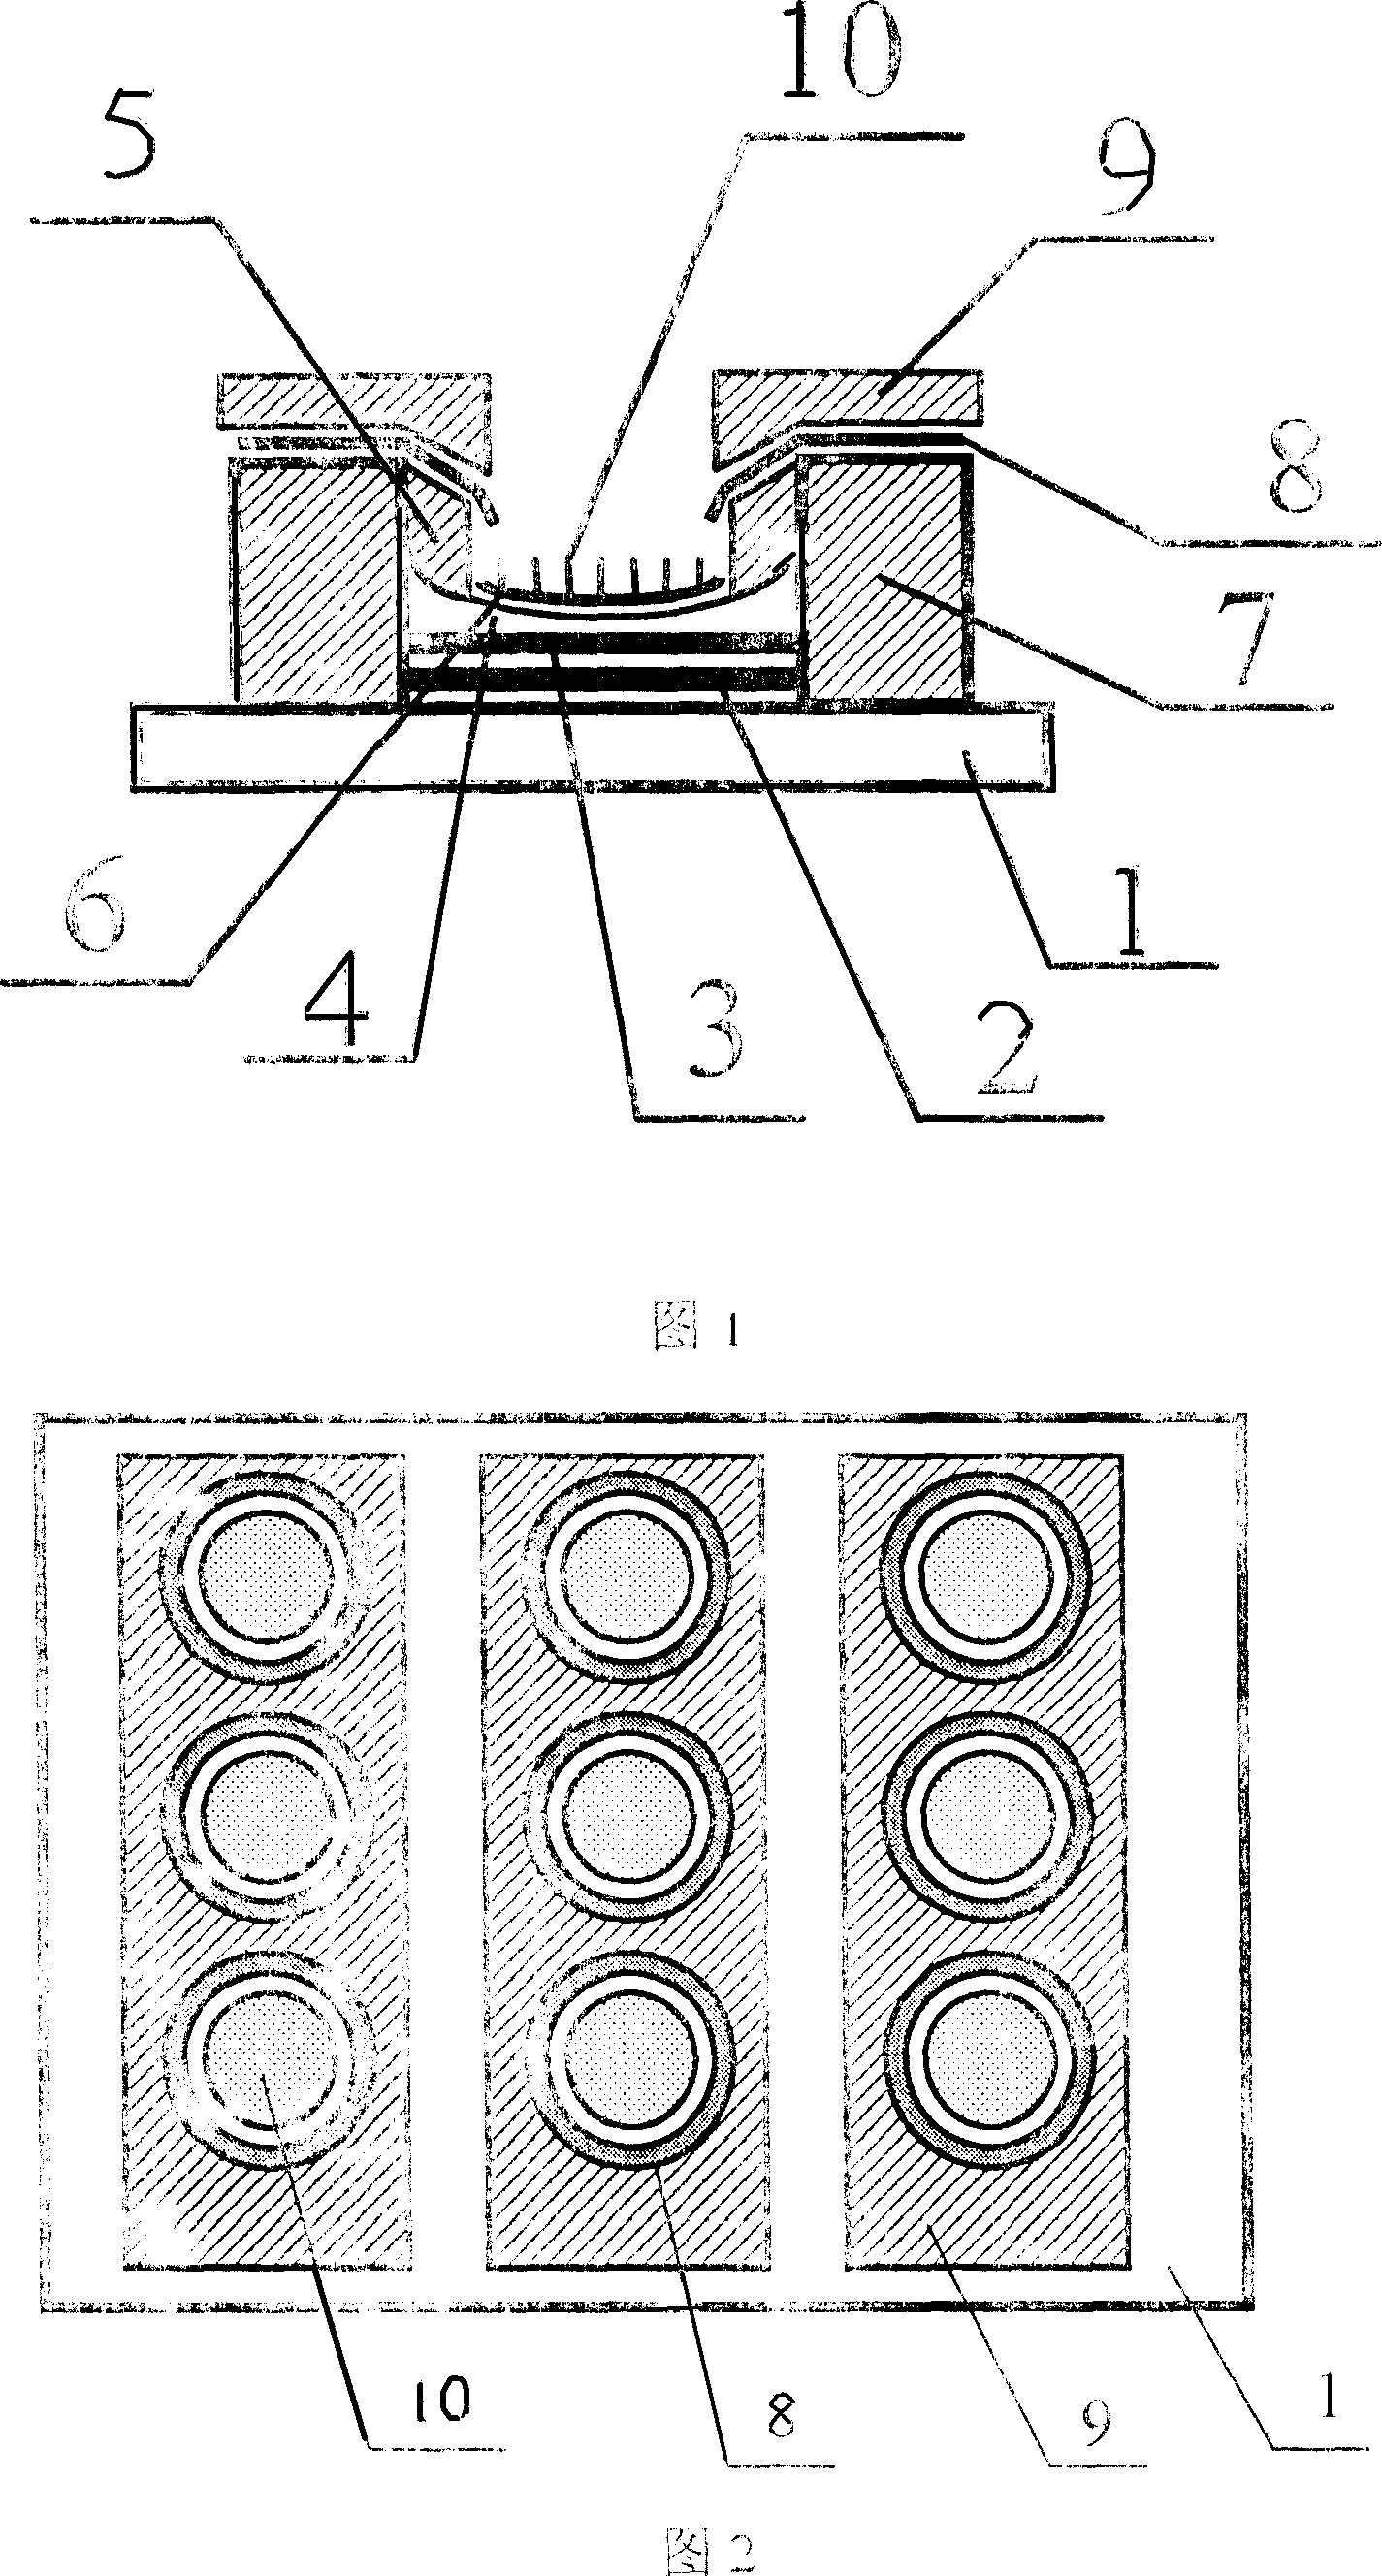 Flat-board display of shallow-pit type cathode curved grid control structure and mfg. process